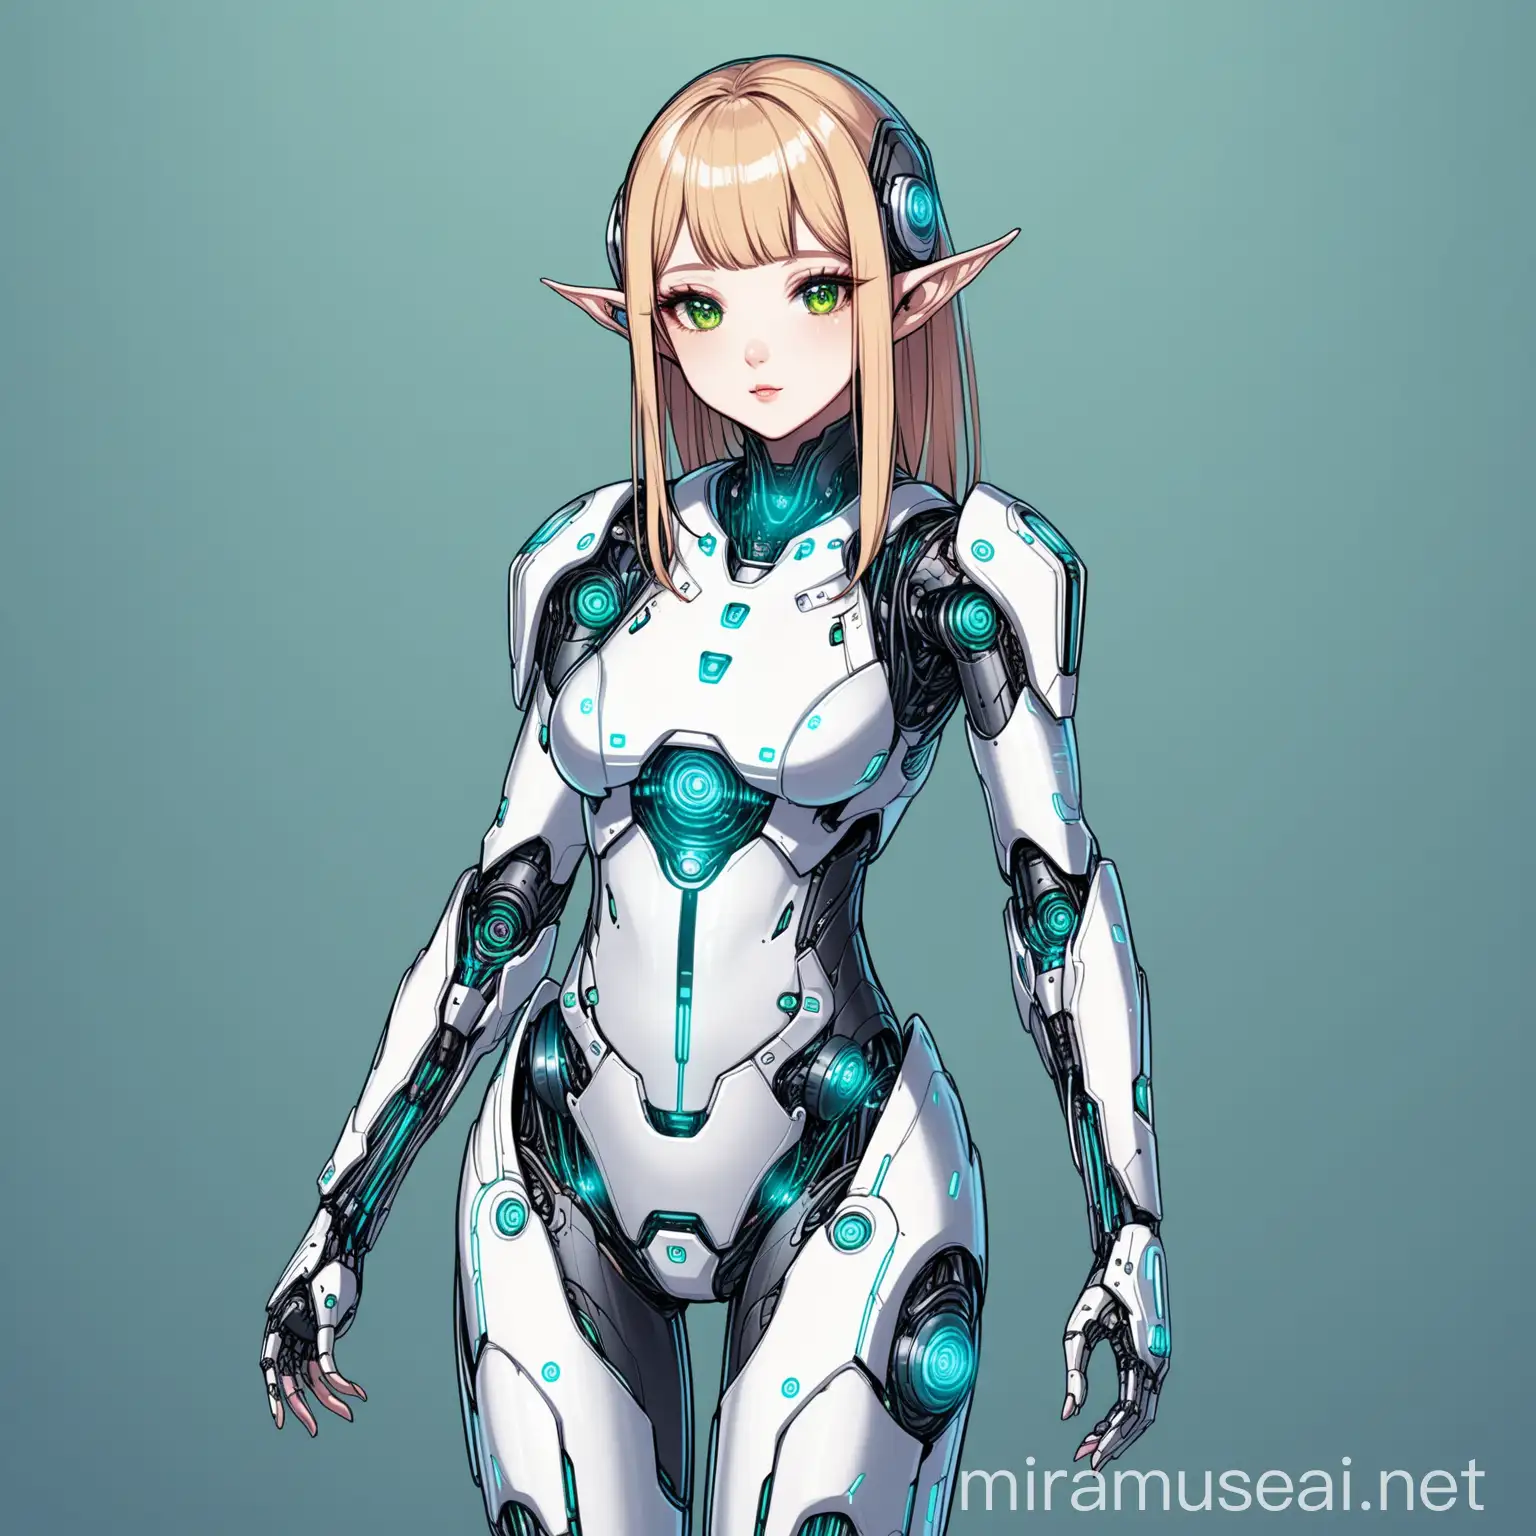 A digital drawing of an artificial intelligence futuristic elf with robotic body Japanese looking girl with bang her